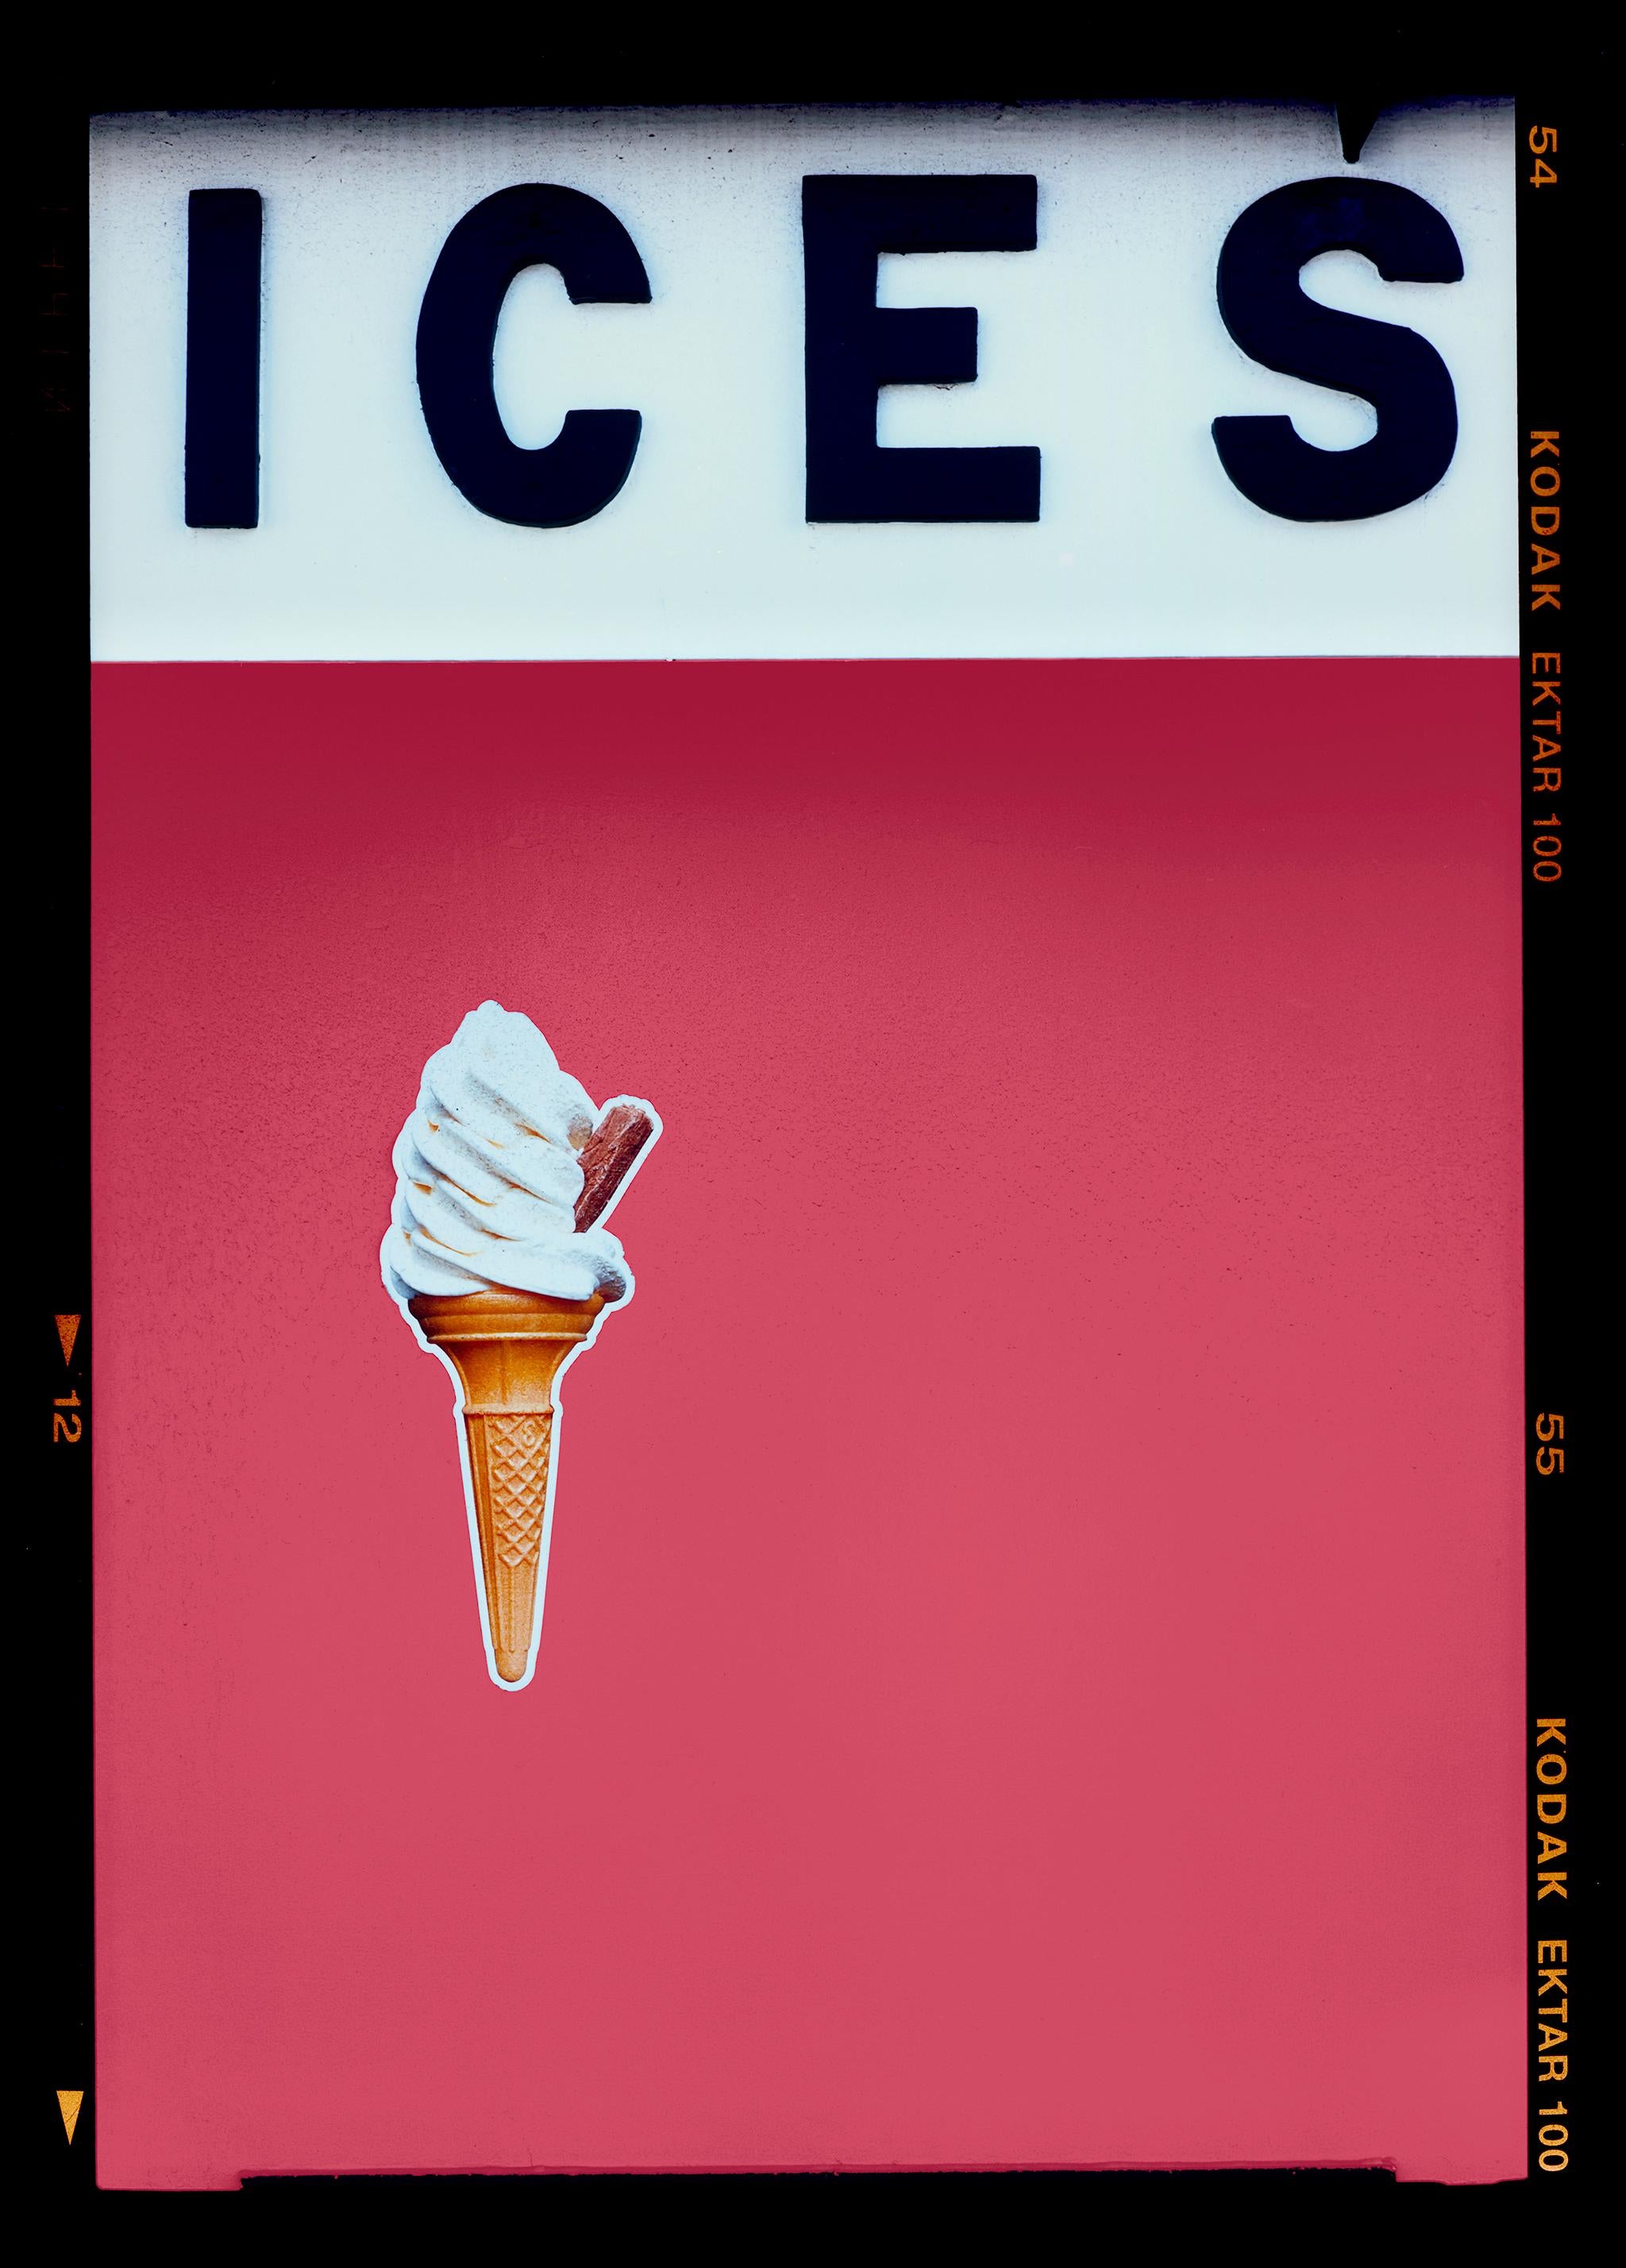 Richard Heeps Print - Ices (Raspberry), Bexhill-on-Sea - British seaside color photography